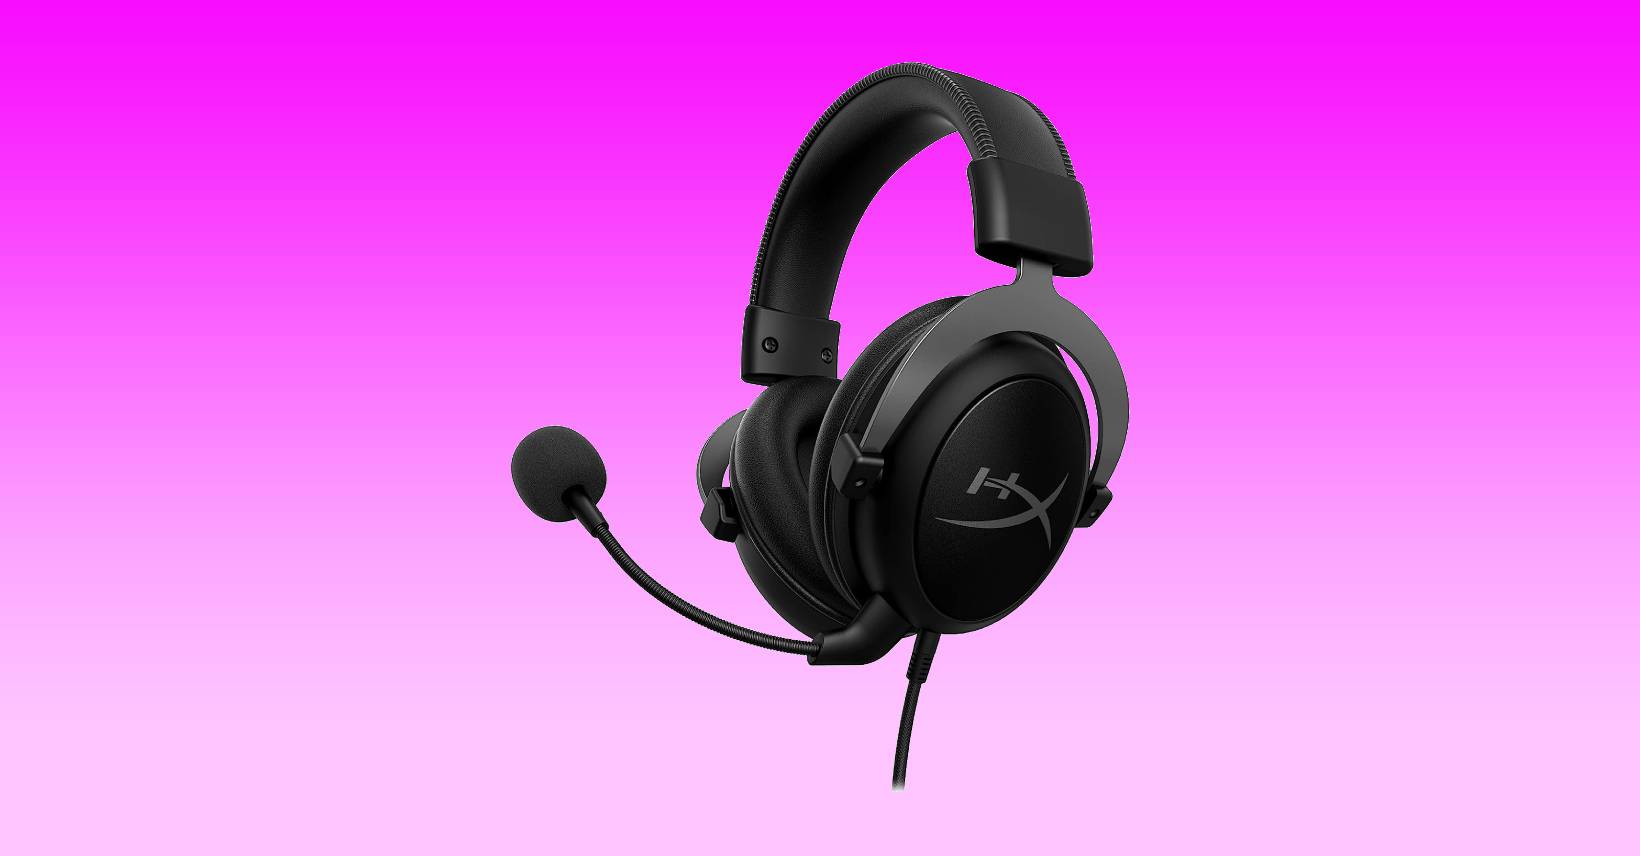 Save $40 on the HyperX Cloud II Gaming Headset – Prime Day deal